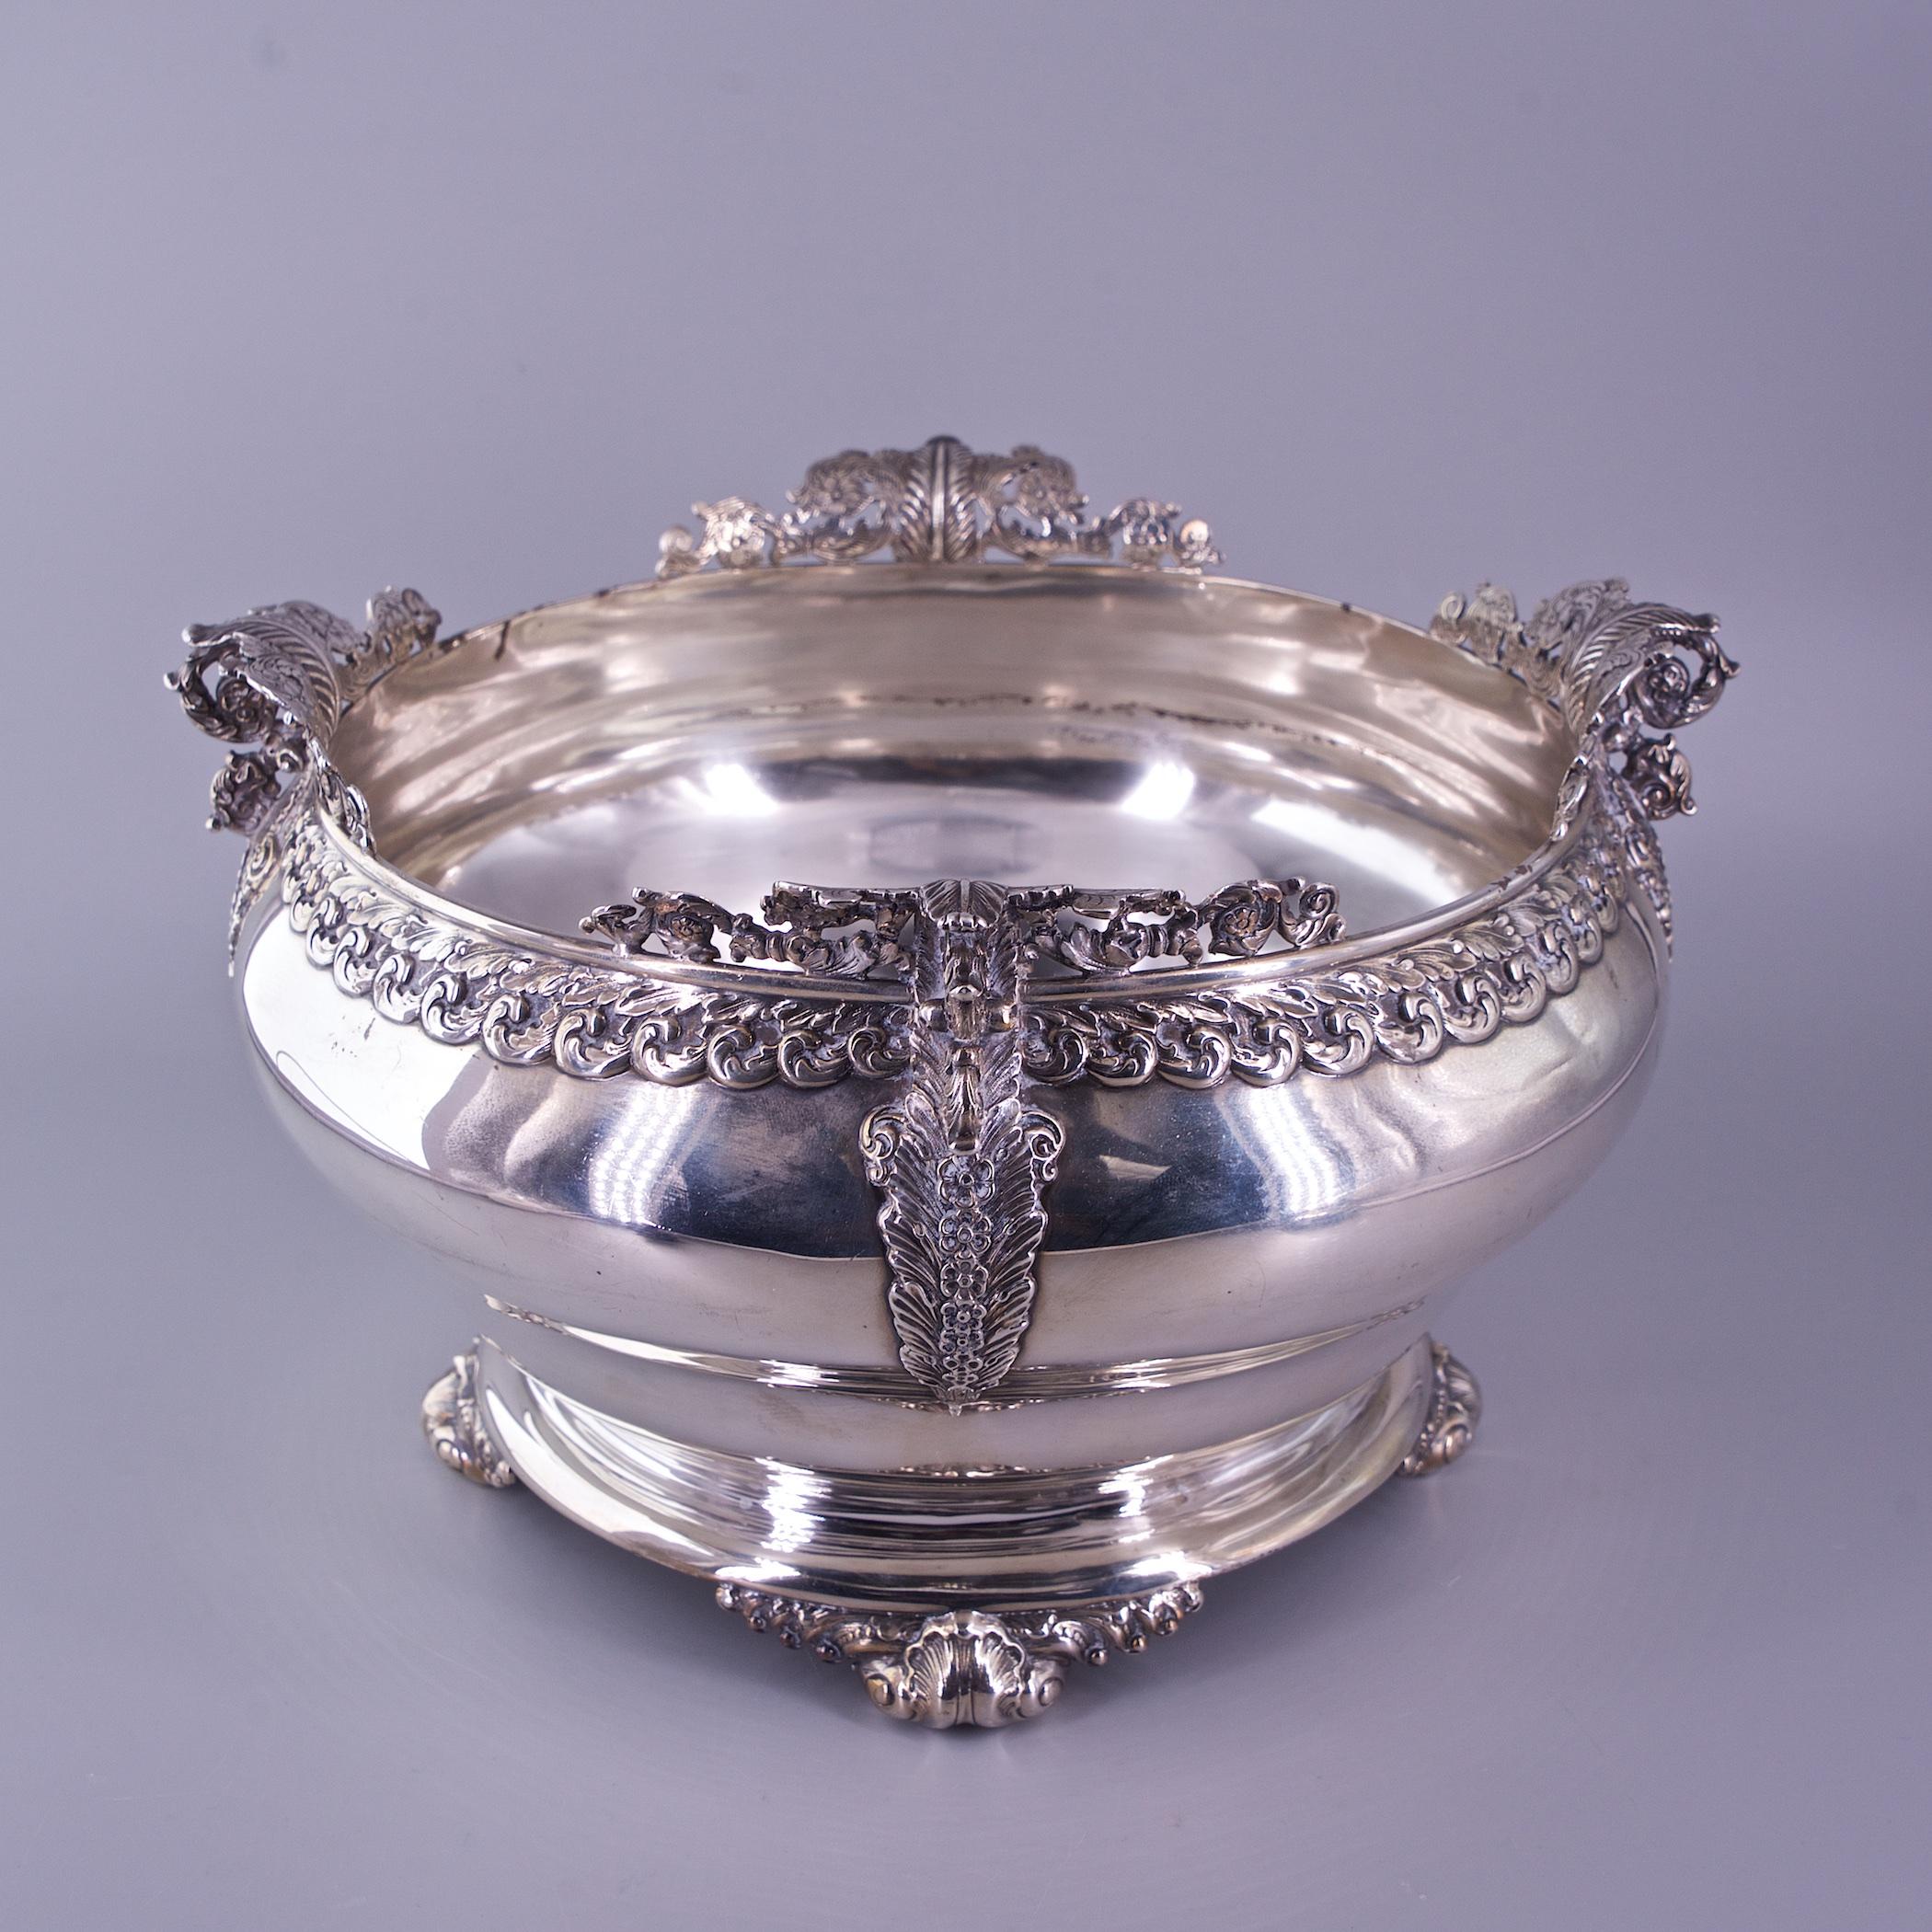 Late Victorian 1890s Tiffany Sterling Centerpiece 